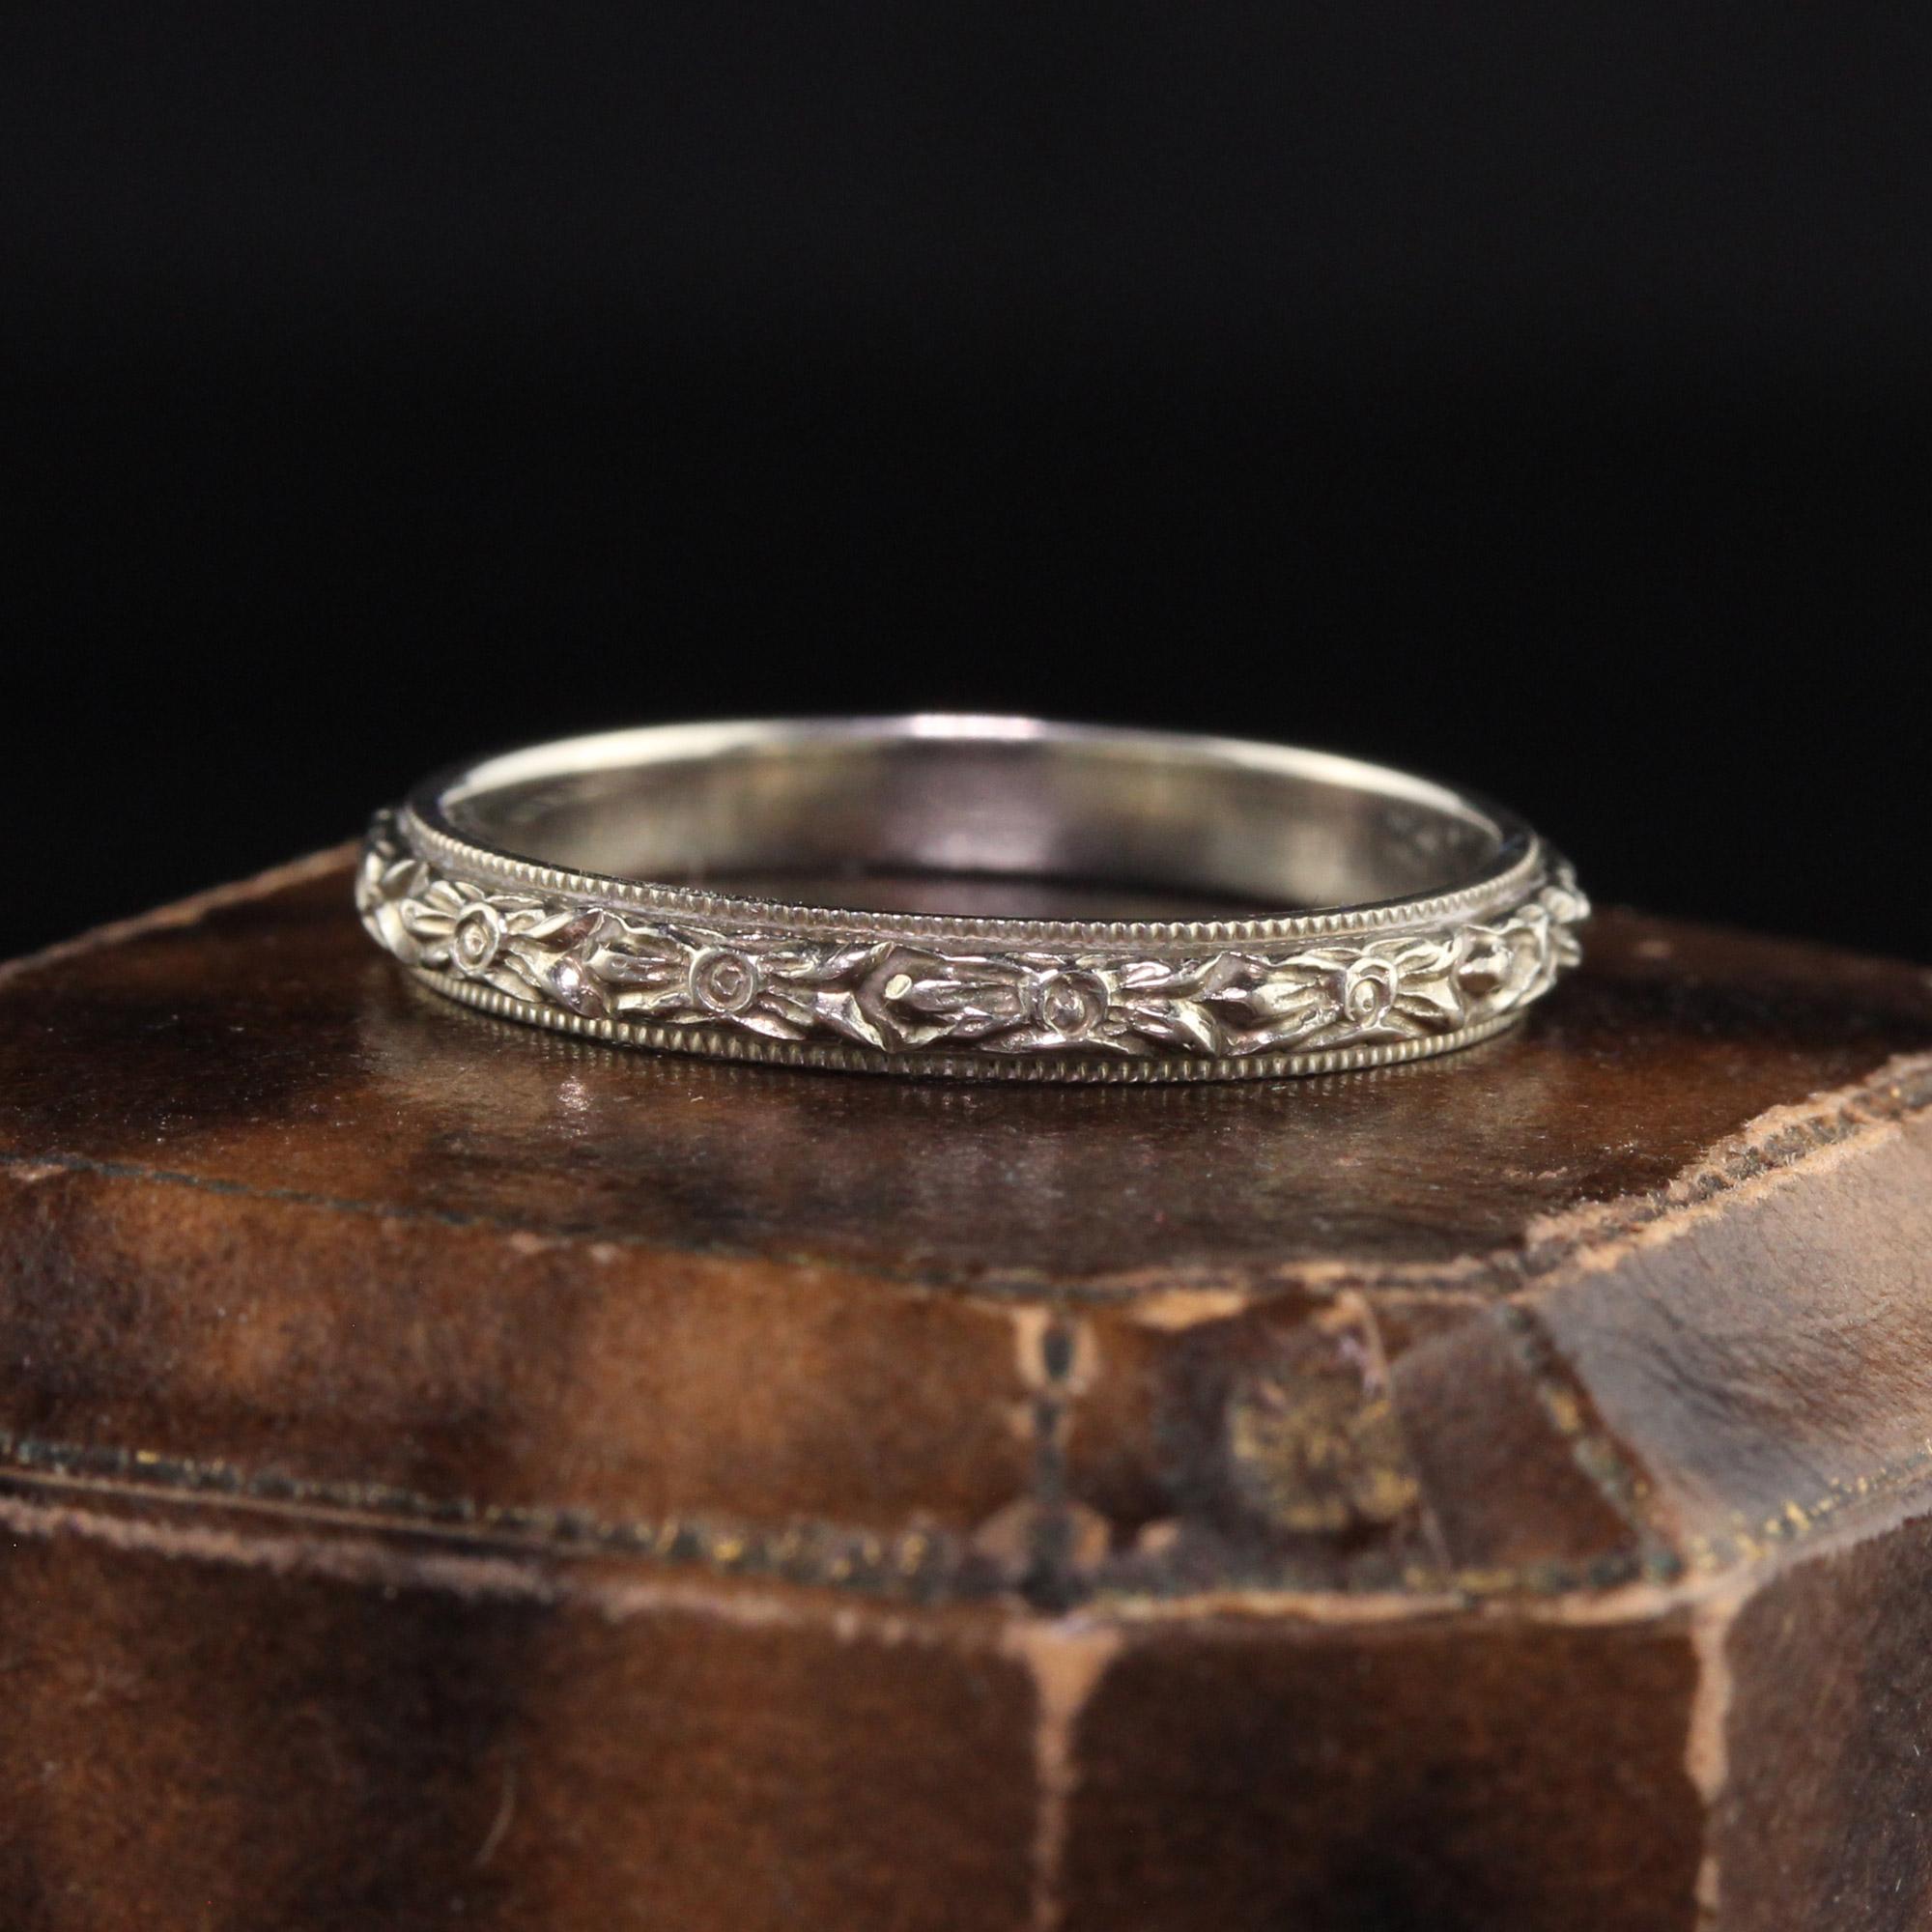 Beautiful Antique Art Deco Wood and Sons 18K White Gold Engraved Blossom Wedding Band. This incredible wedding band is in absolutely amazing condition with deep engravings going around the entire ring in a blossom pattern.

Item #R1138

Metal: 18K